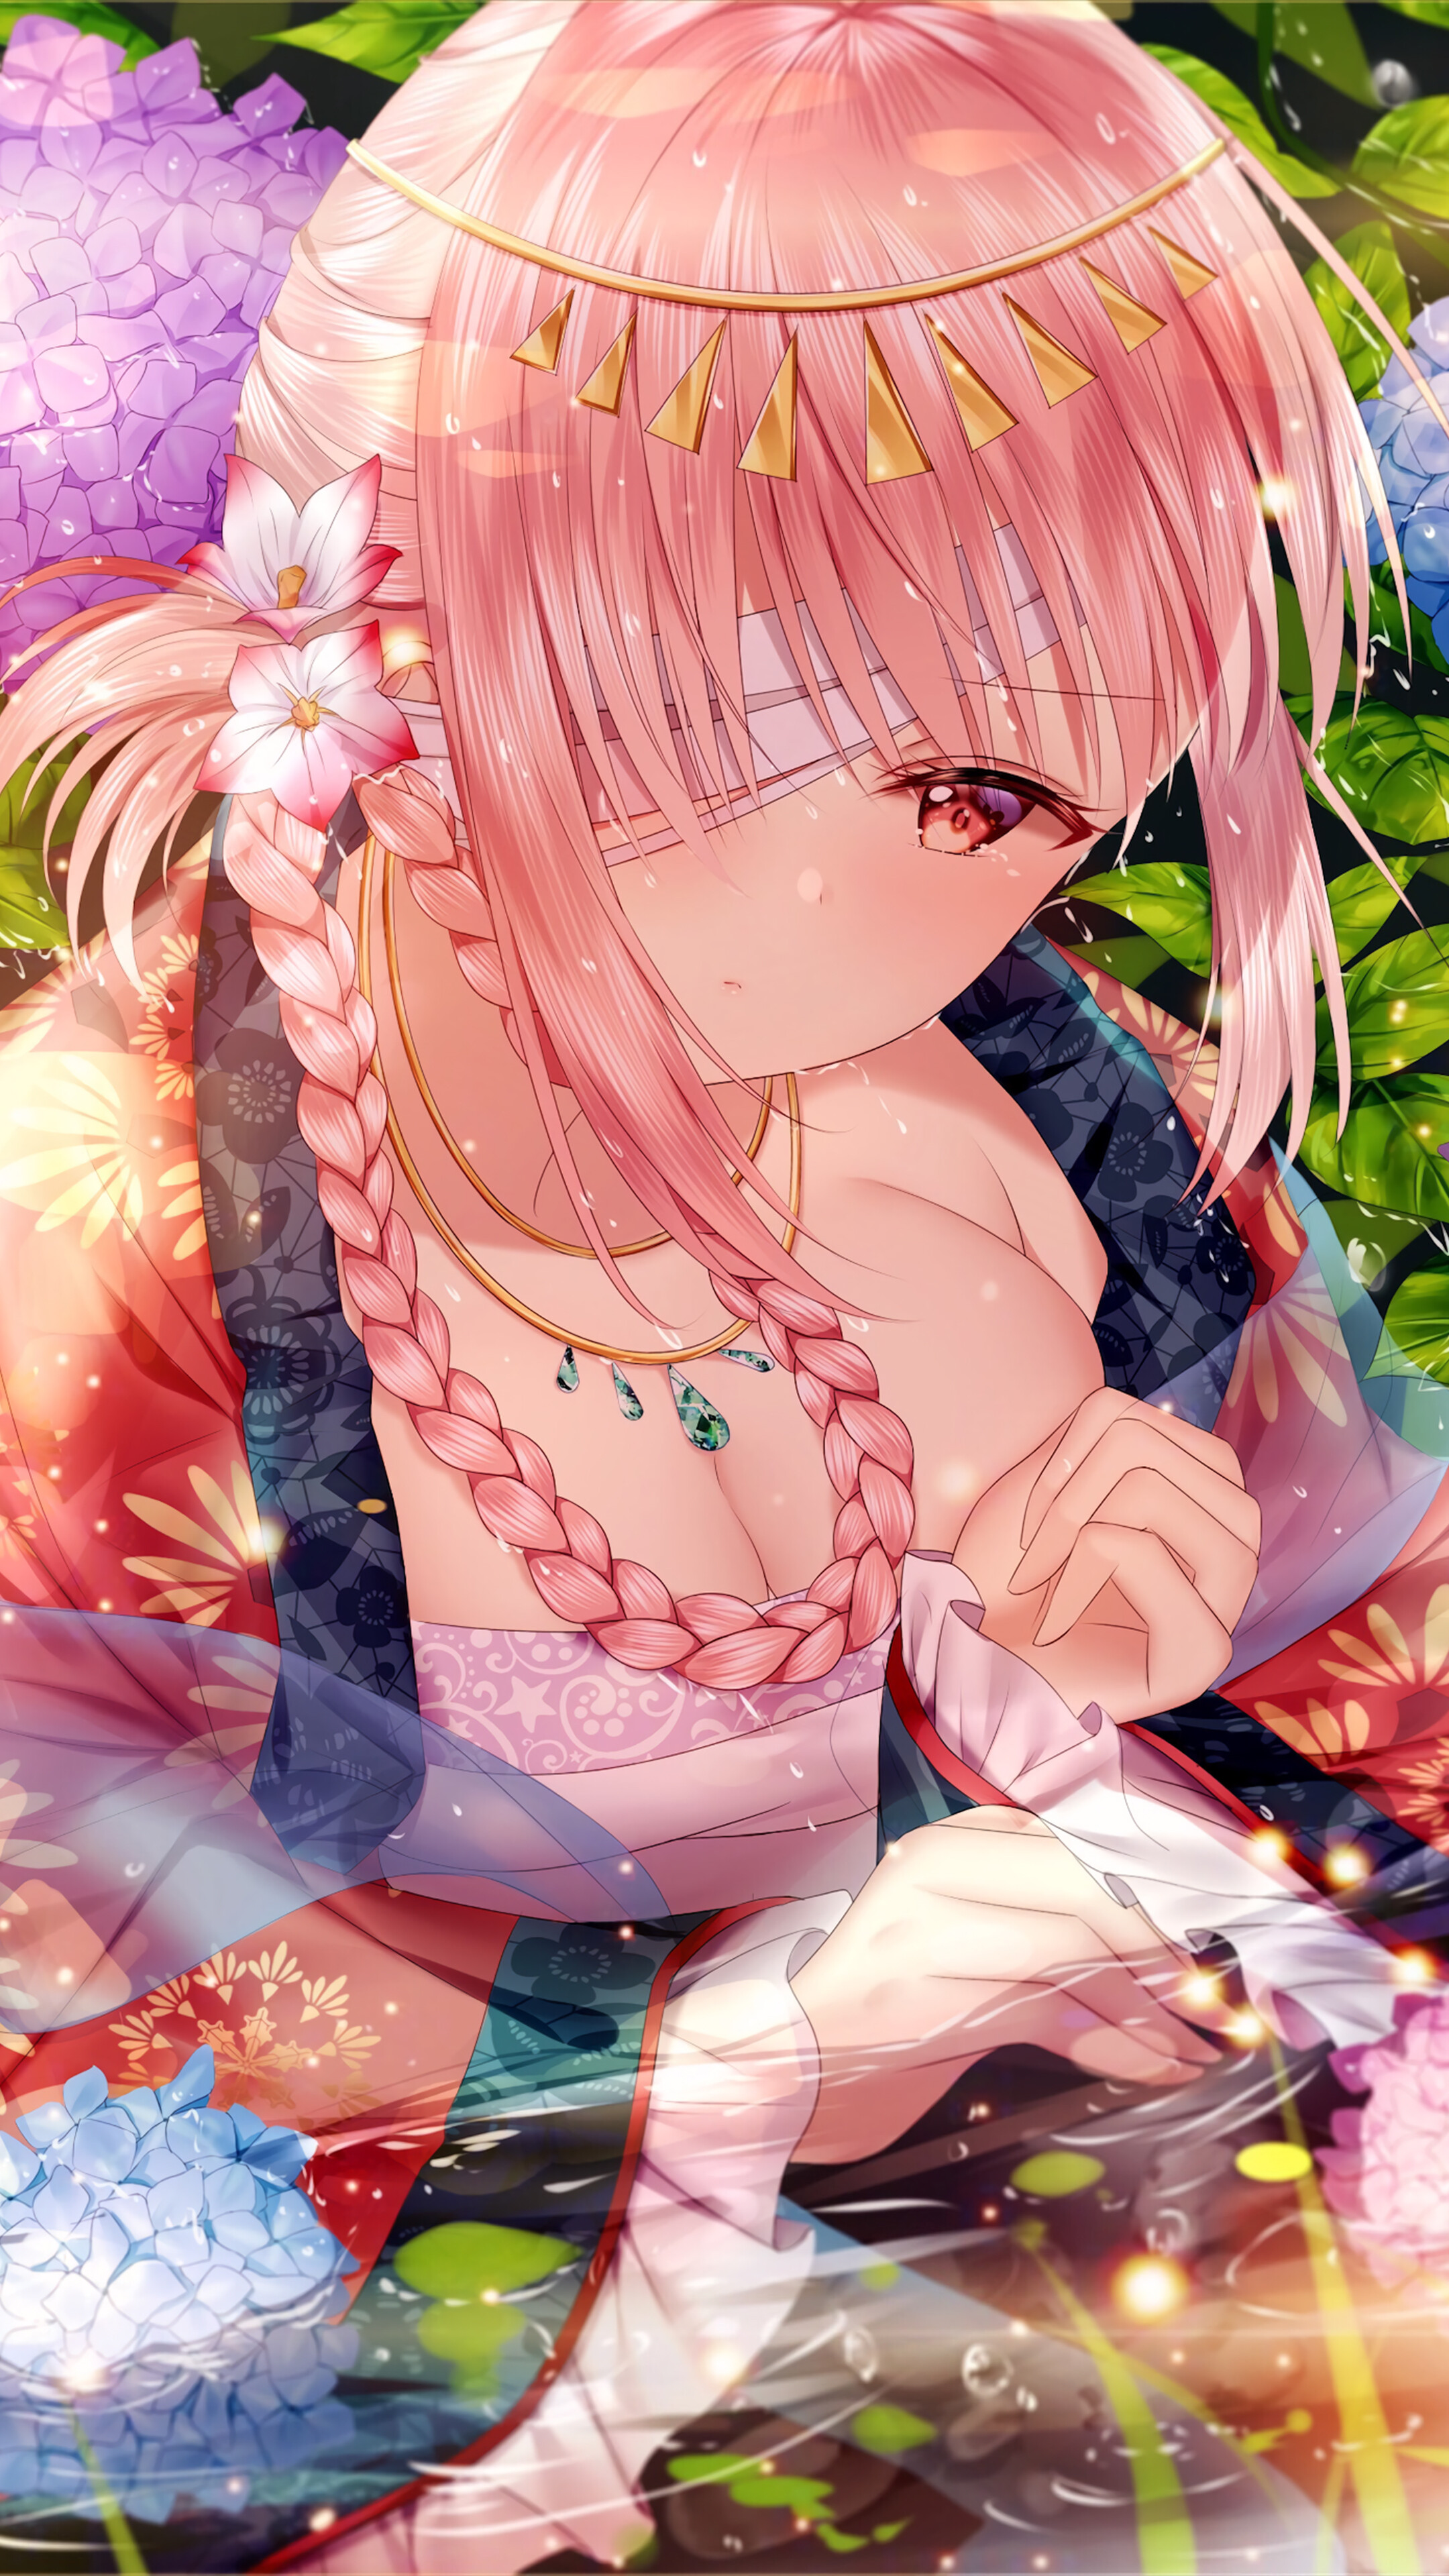 Anime, Girl, Kimono, Pink Hair, Flowers, 4K phone HD Wallpaper, Image, Background, Photo and Picture. Mocah HD Wallpaper